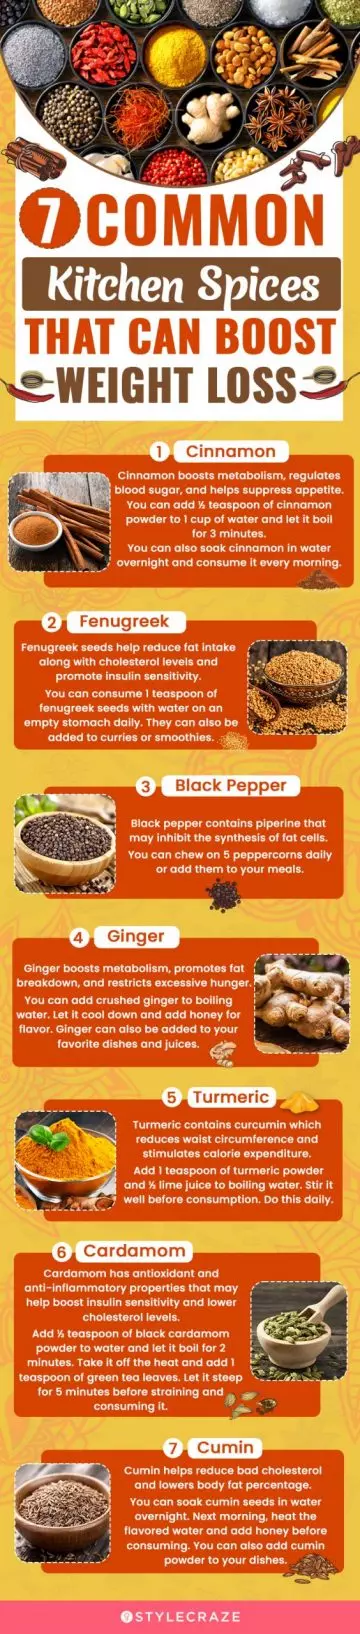 7 common kitchen spices that can boost weight loss (infographic)